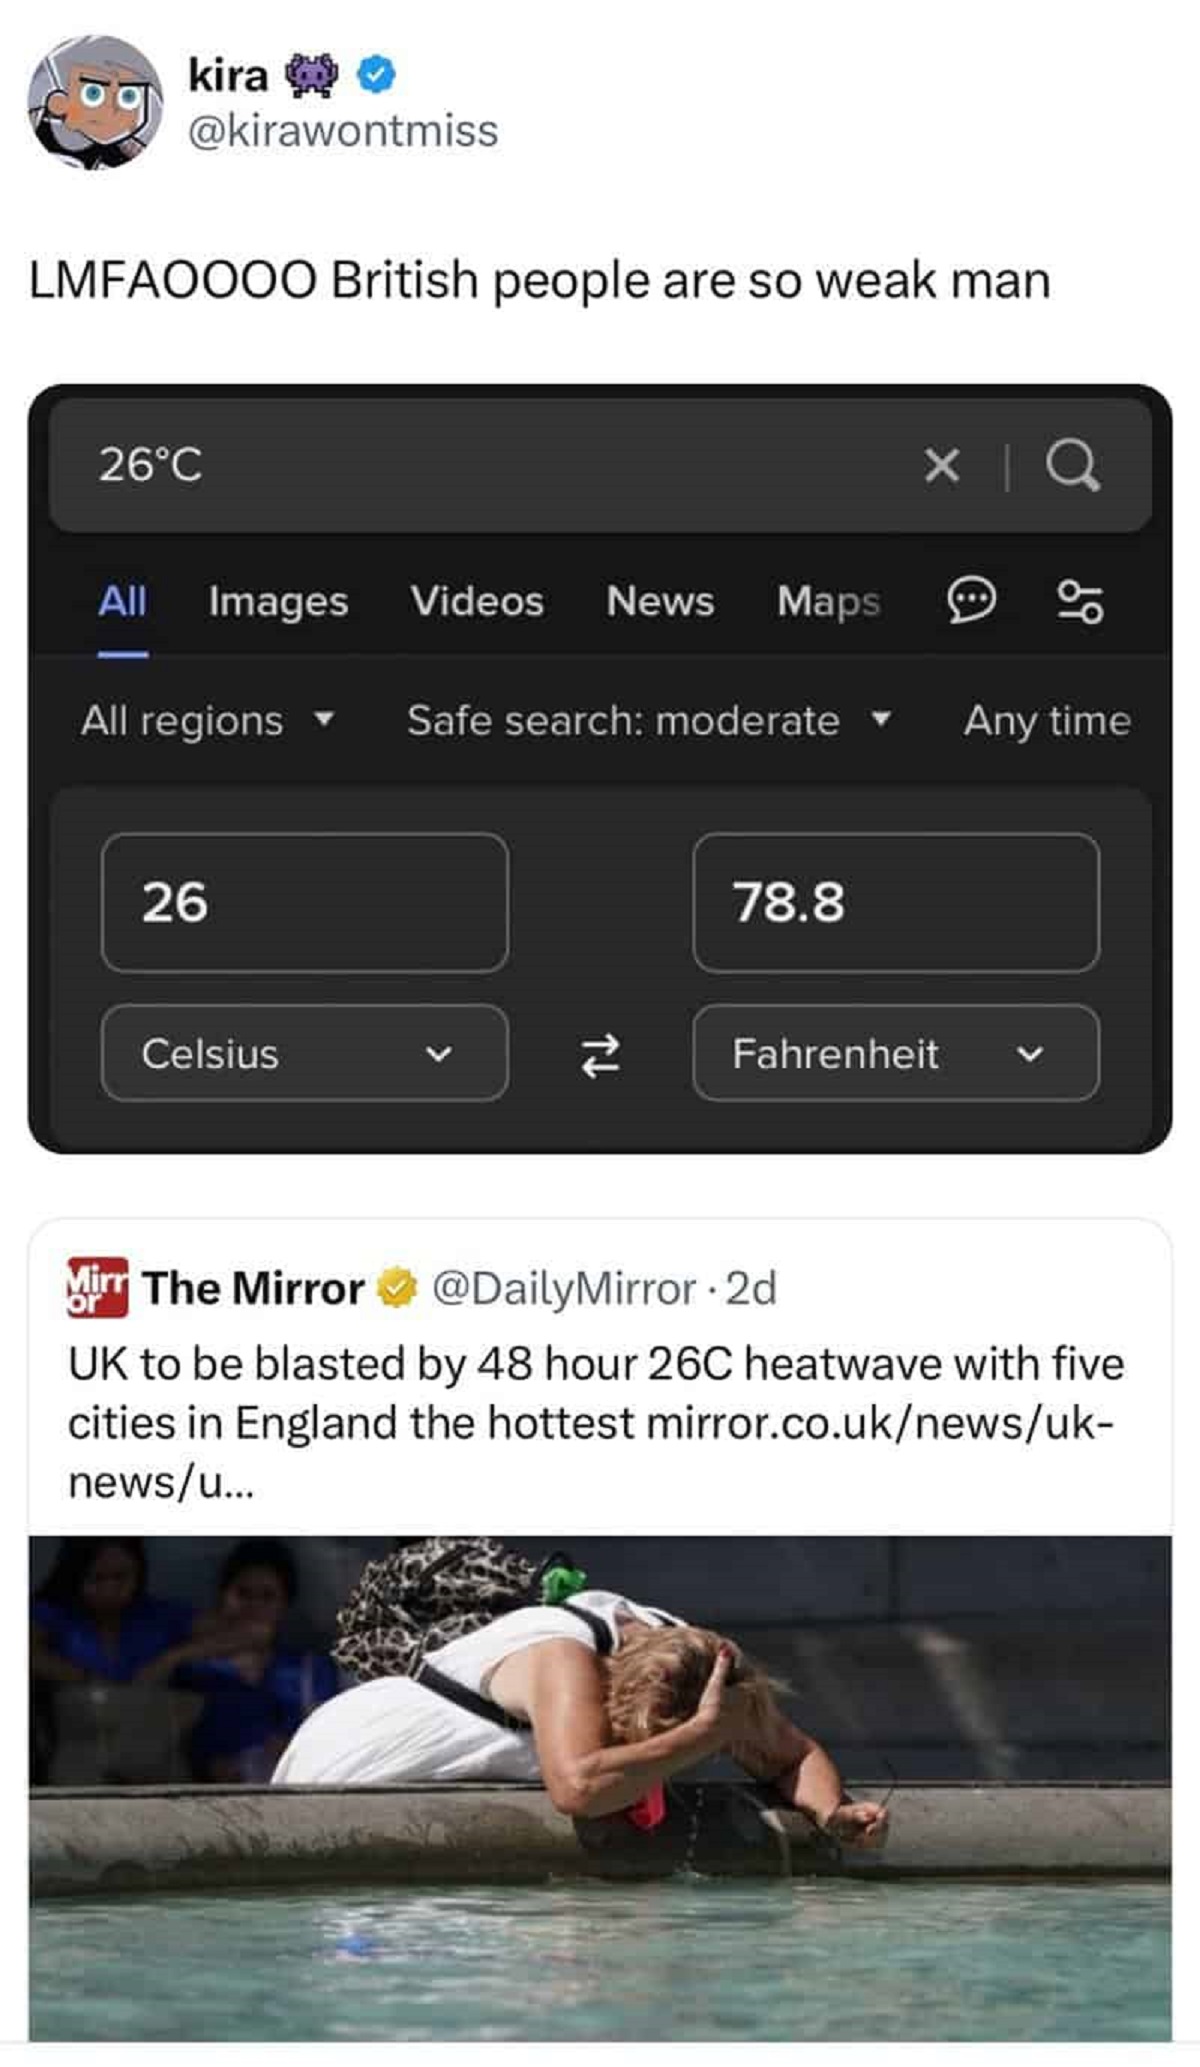 Heat wave - kira Lmfaoooo British people are so weak man 26C All Images Videos News Maps All regions Safe search moderate Any time 26 Celsius 78.8 74 Fahrenheit Mirr The Mirror or 2d Uk to be blasted by 48 hour 26C heatwave with five cities in England the